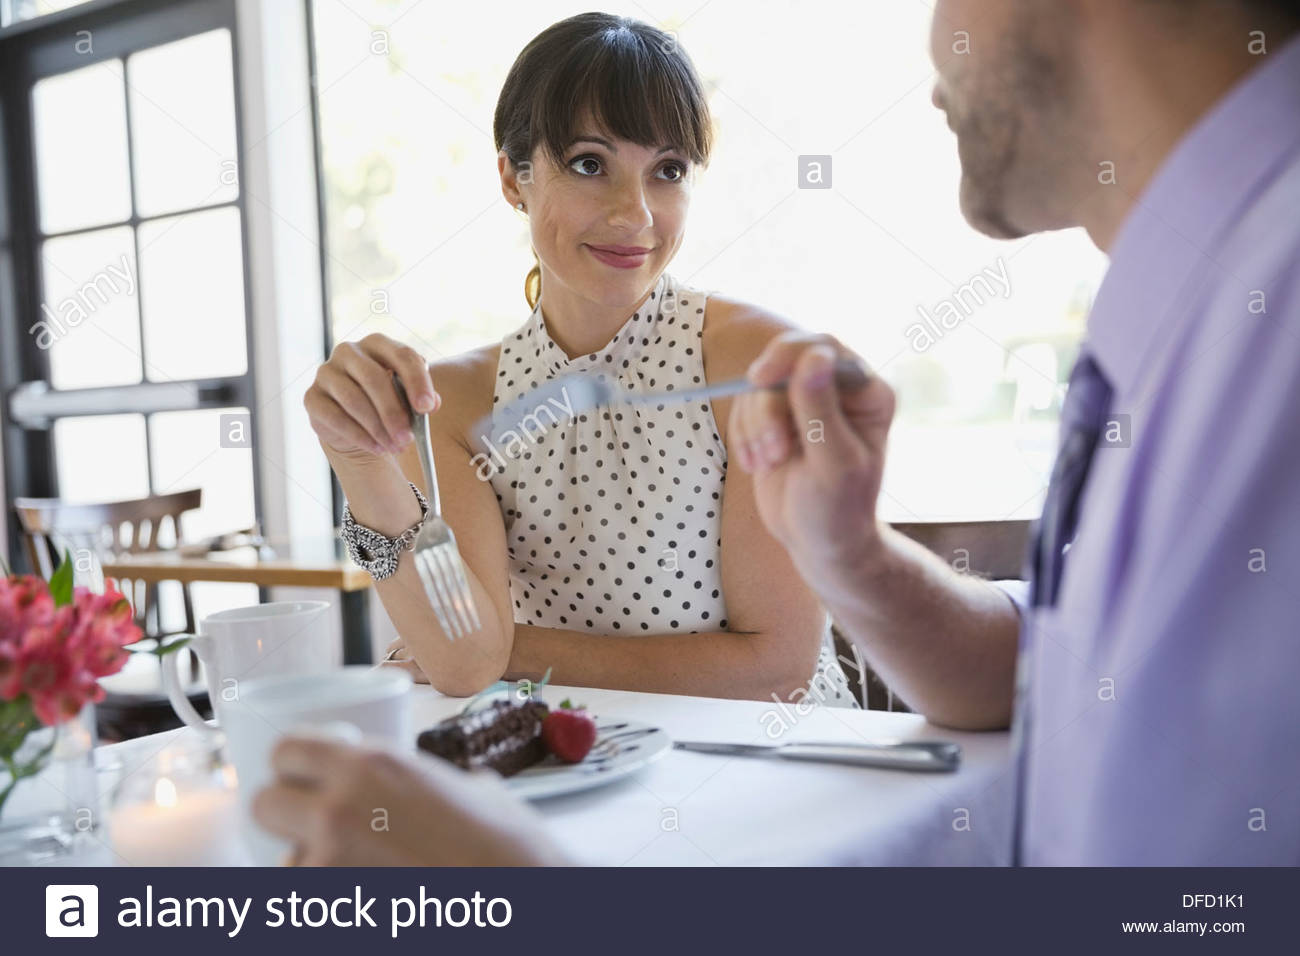 Professional couple dining out Stock Photo